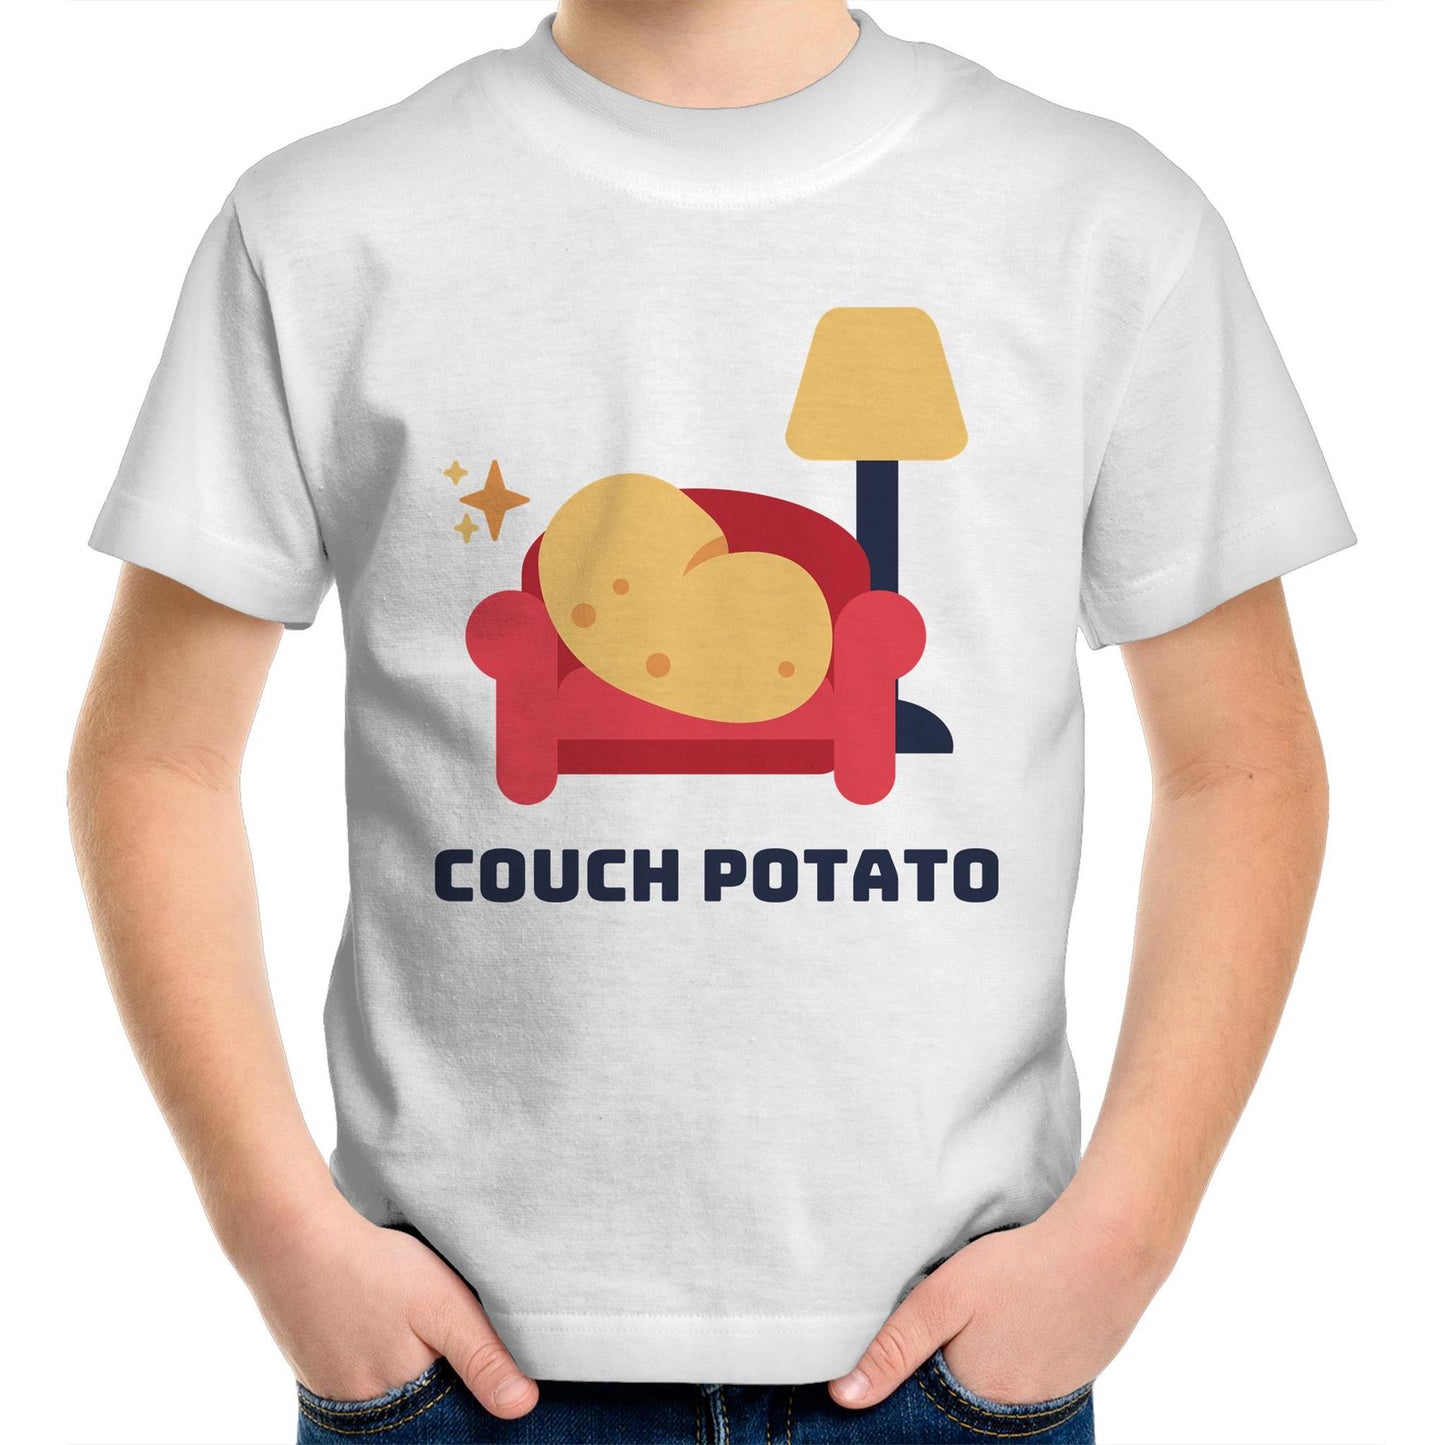 Couch Potato - Kids Youth Crew T-Shirt White Kids Youth T-shirt Funny